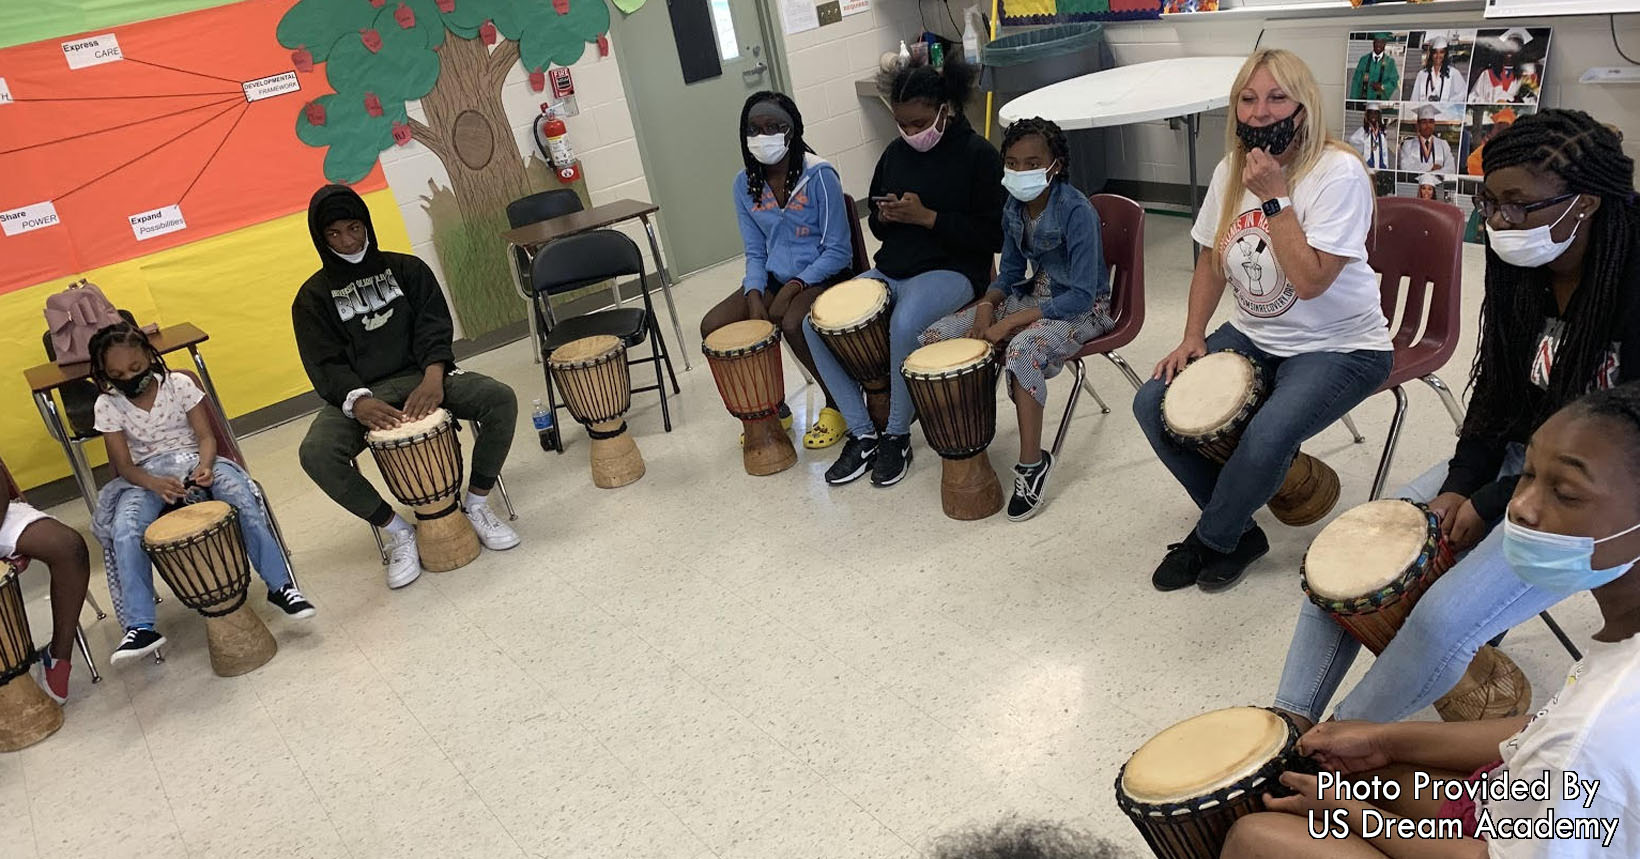 A group of students participate in a drum circle.